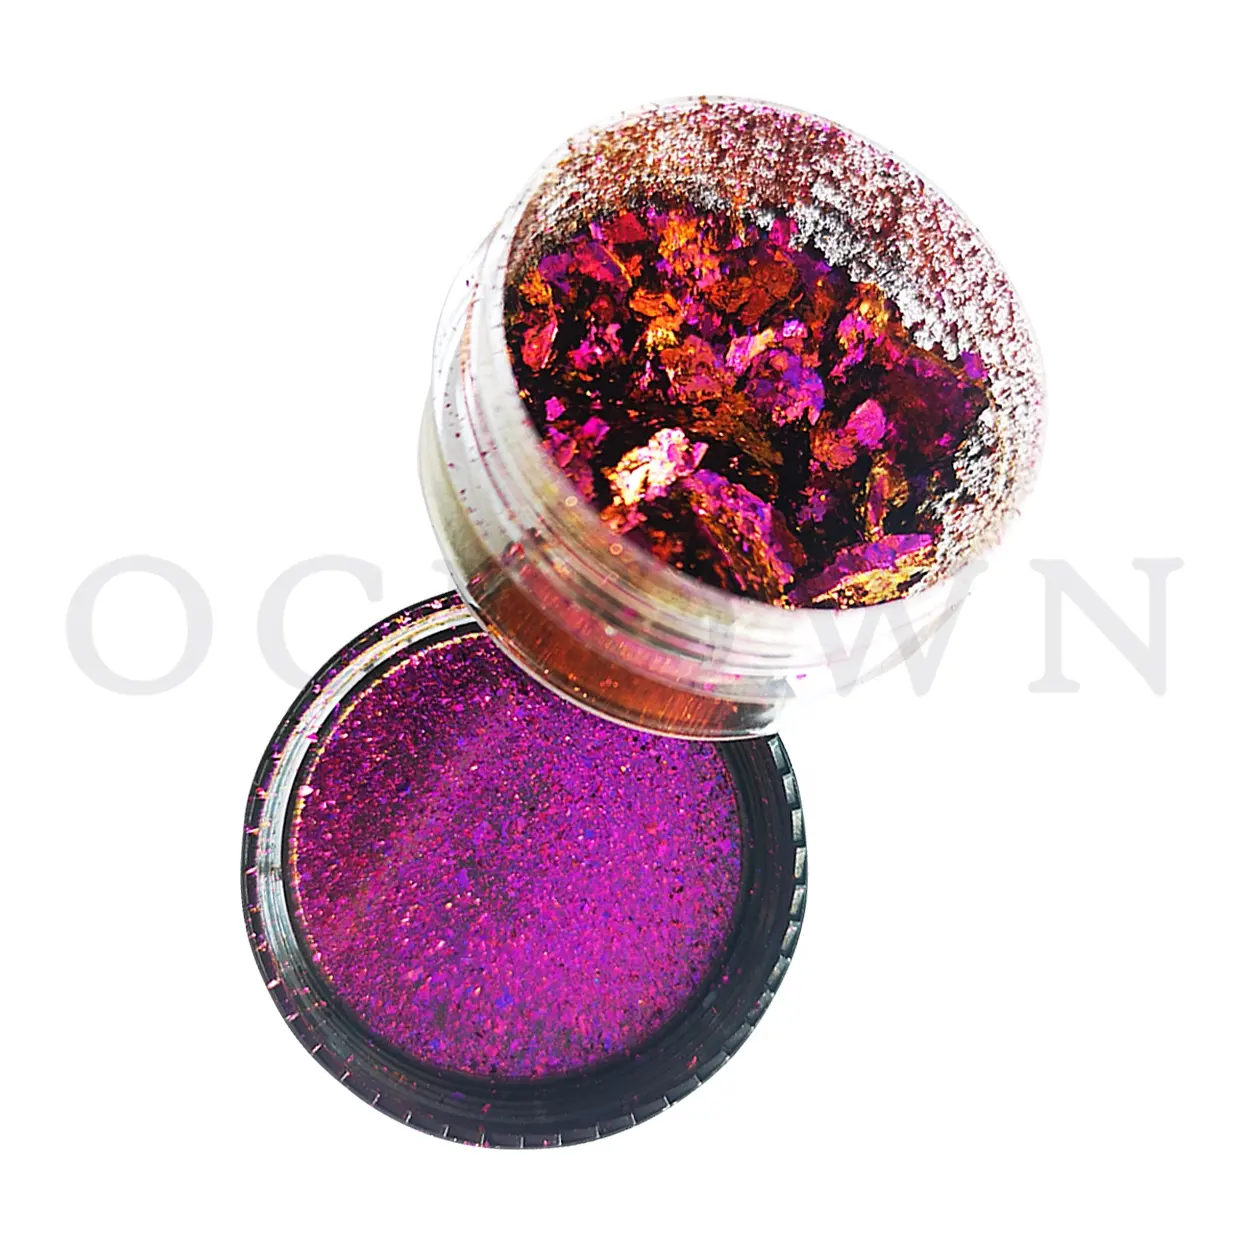 Cosmetic Grade Chameleon Glitter Nail,Body,Face,Lipstick,Cosmetic,Eyeshadow Flakes